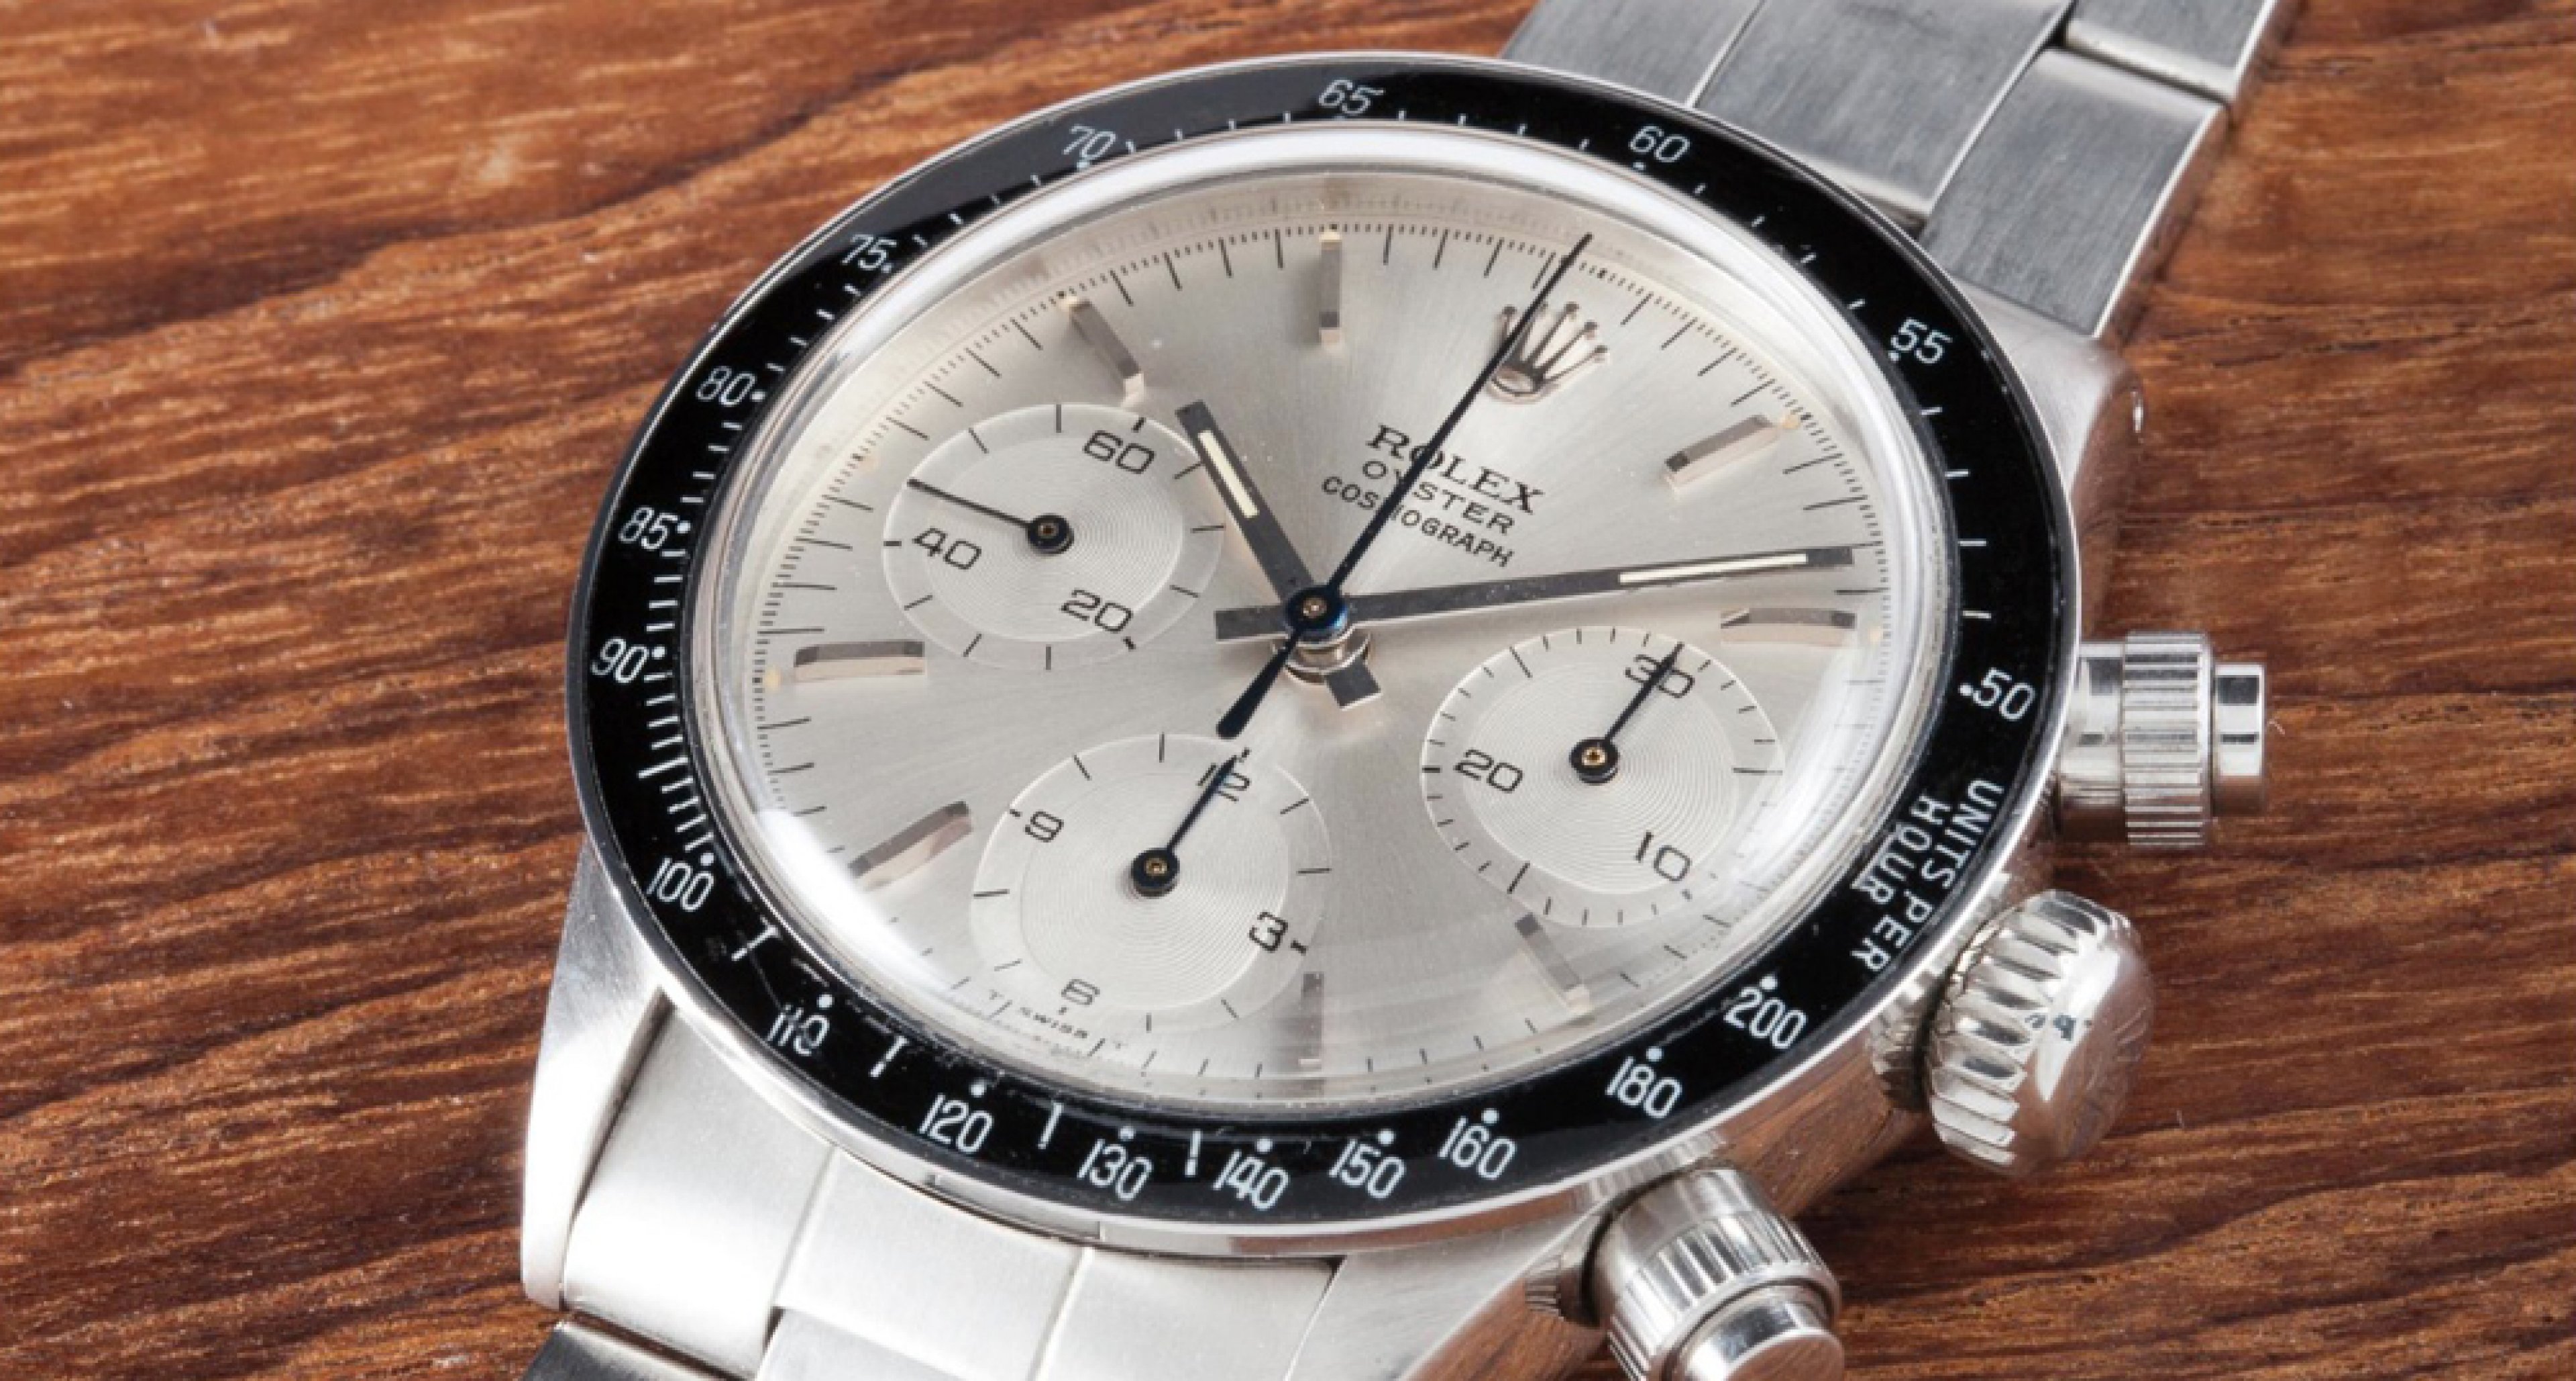 The Rolex Cosmograph "Albino" was formerly owned by Eric "Slow Hand" Clapton and sold for 1.2 Million Euros